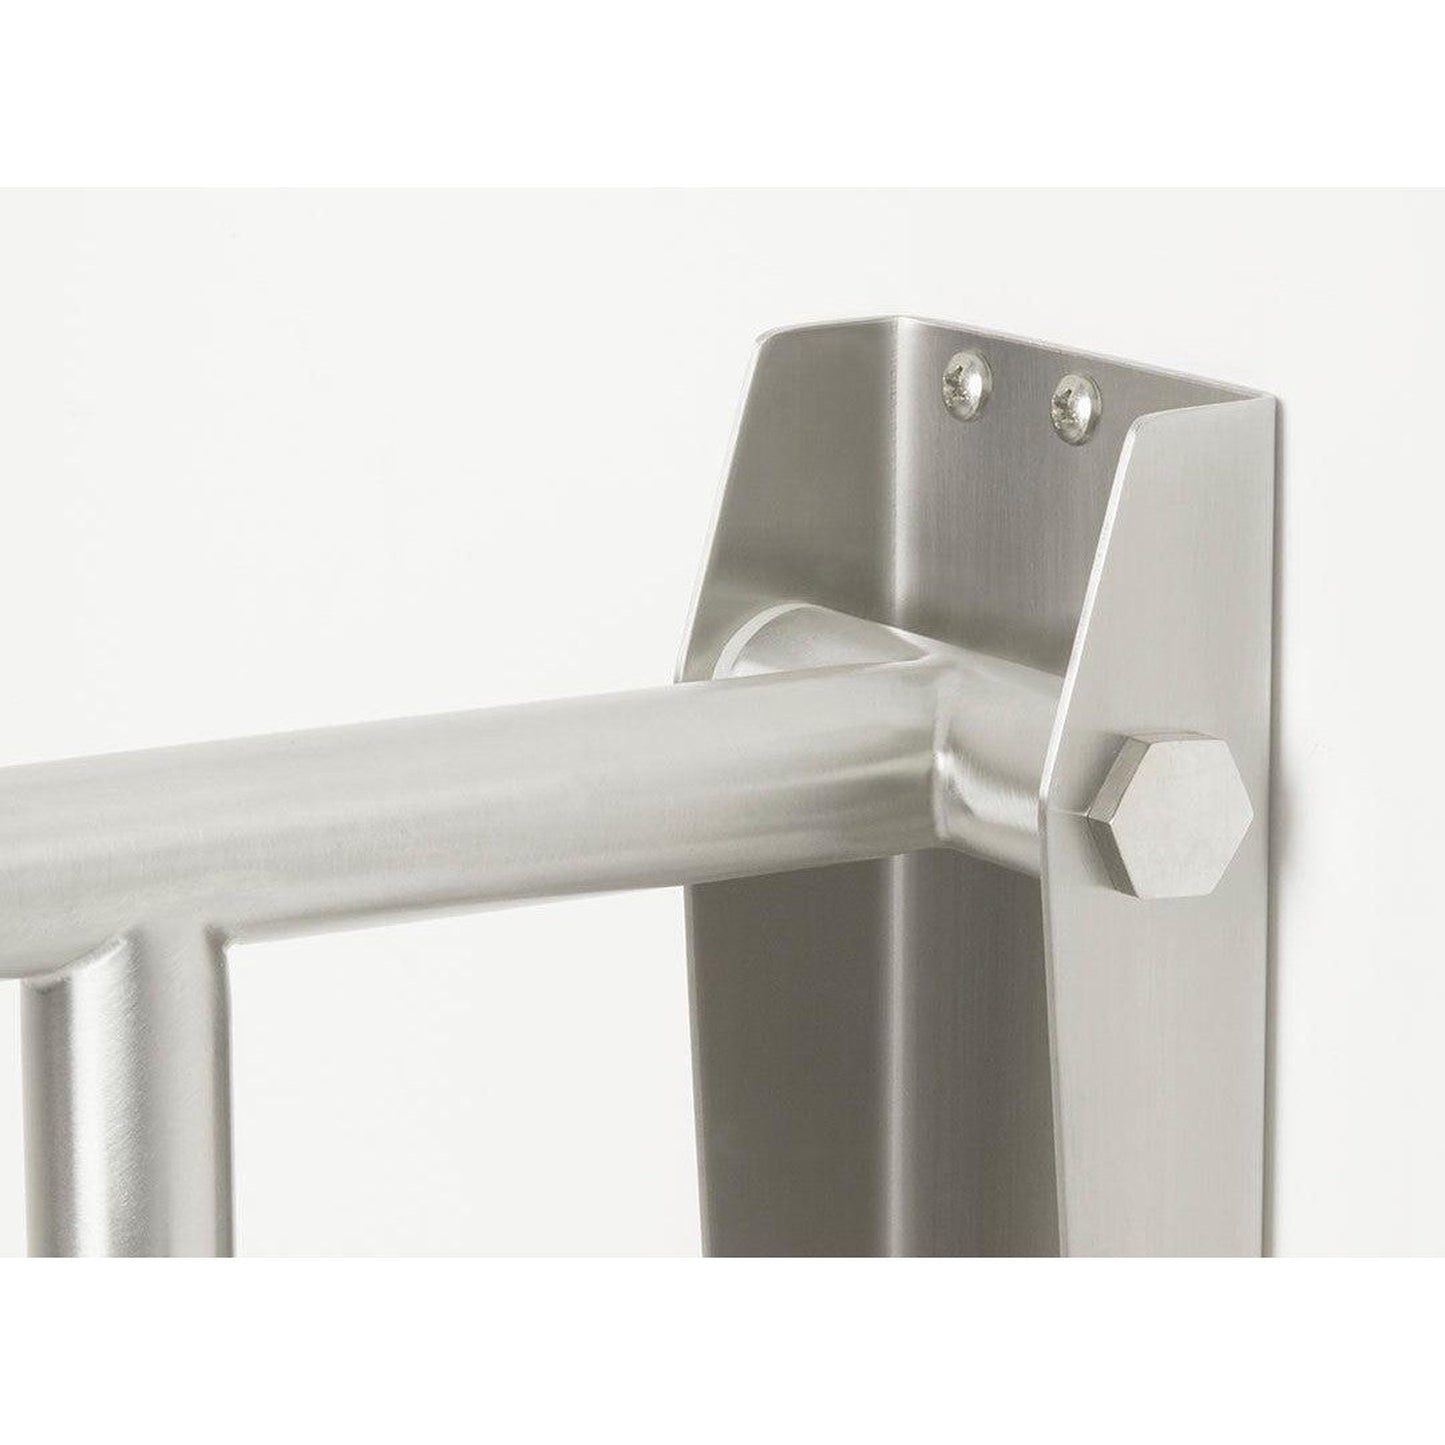 Seachrome Signature Series 30" x 10" Satin Stainless Steel Exposed Flange Swing-Up Grab Bar